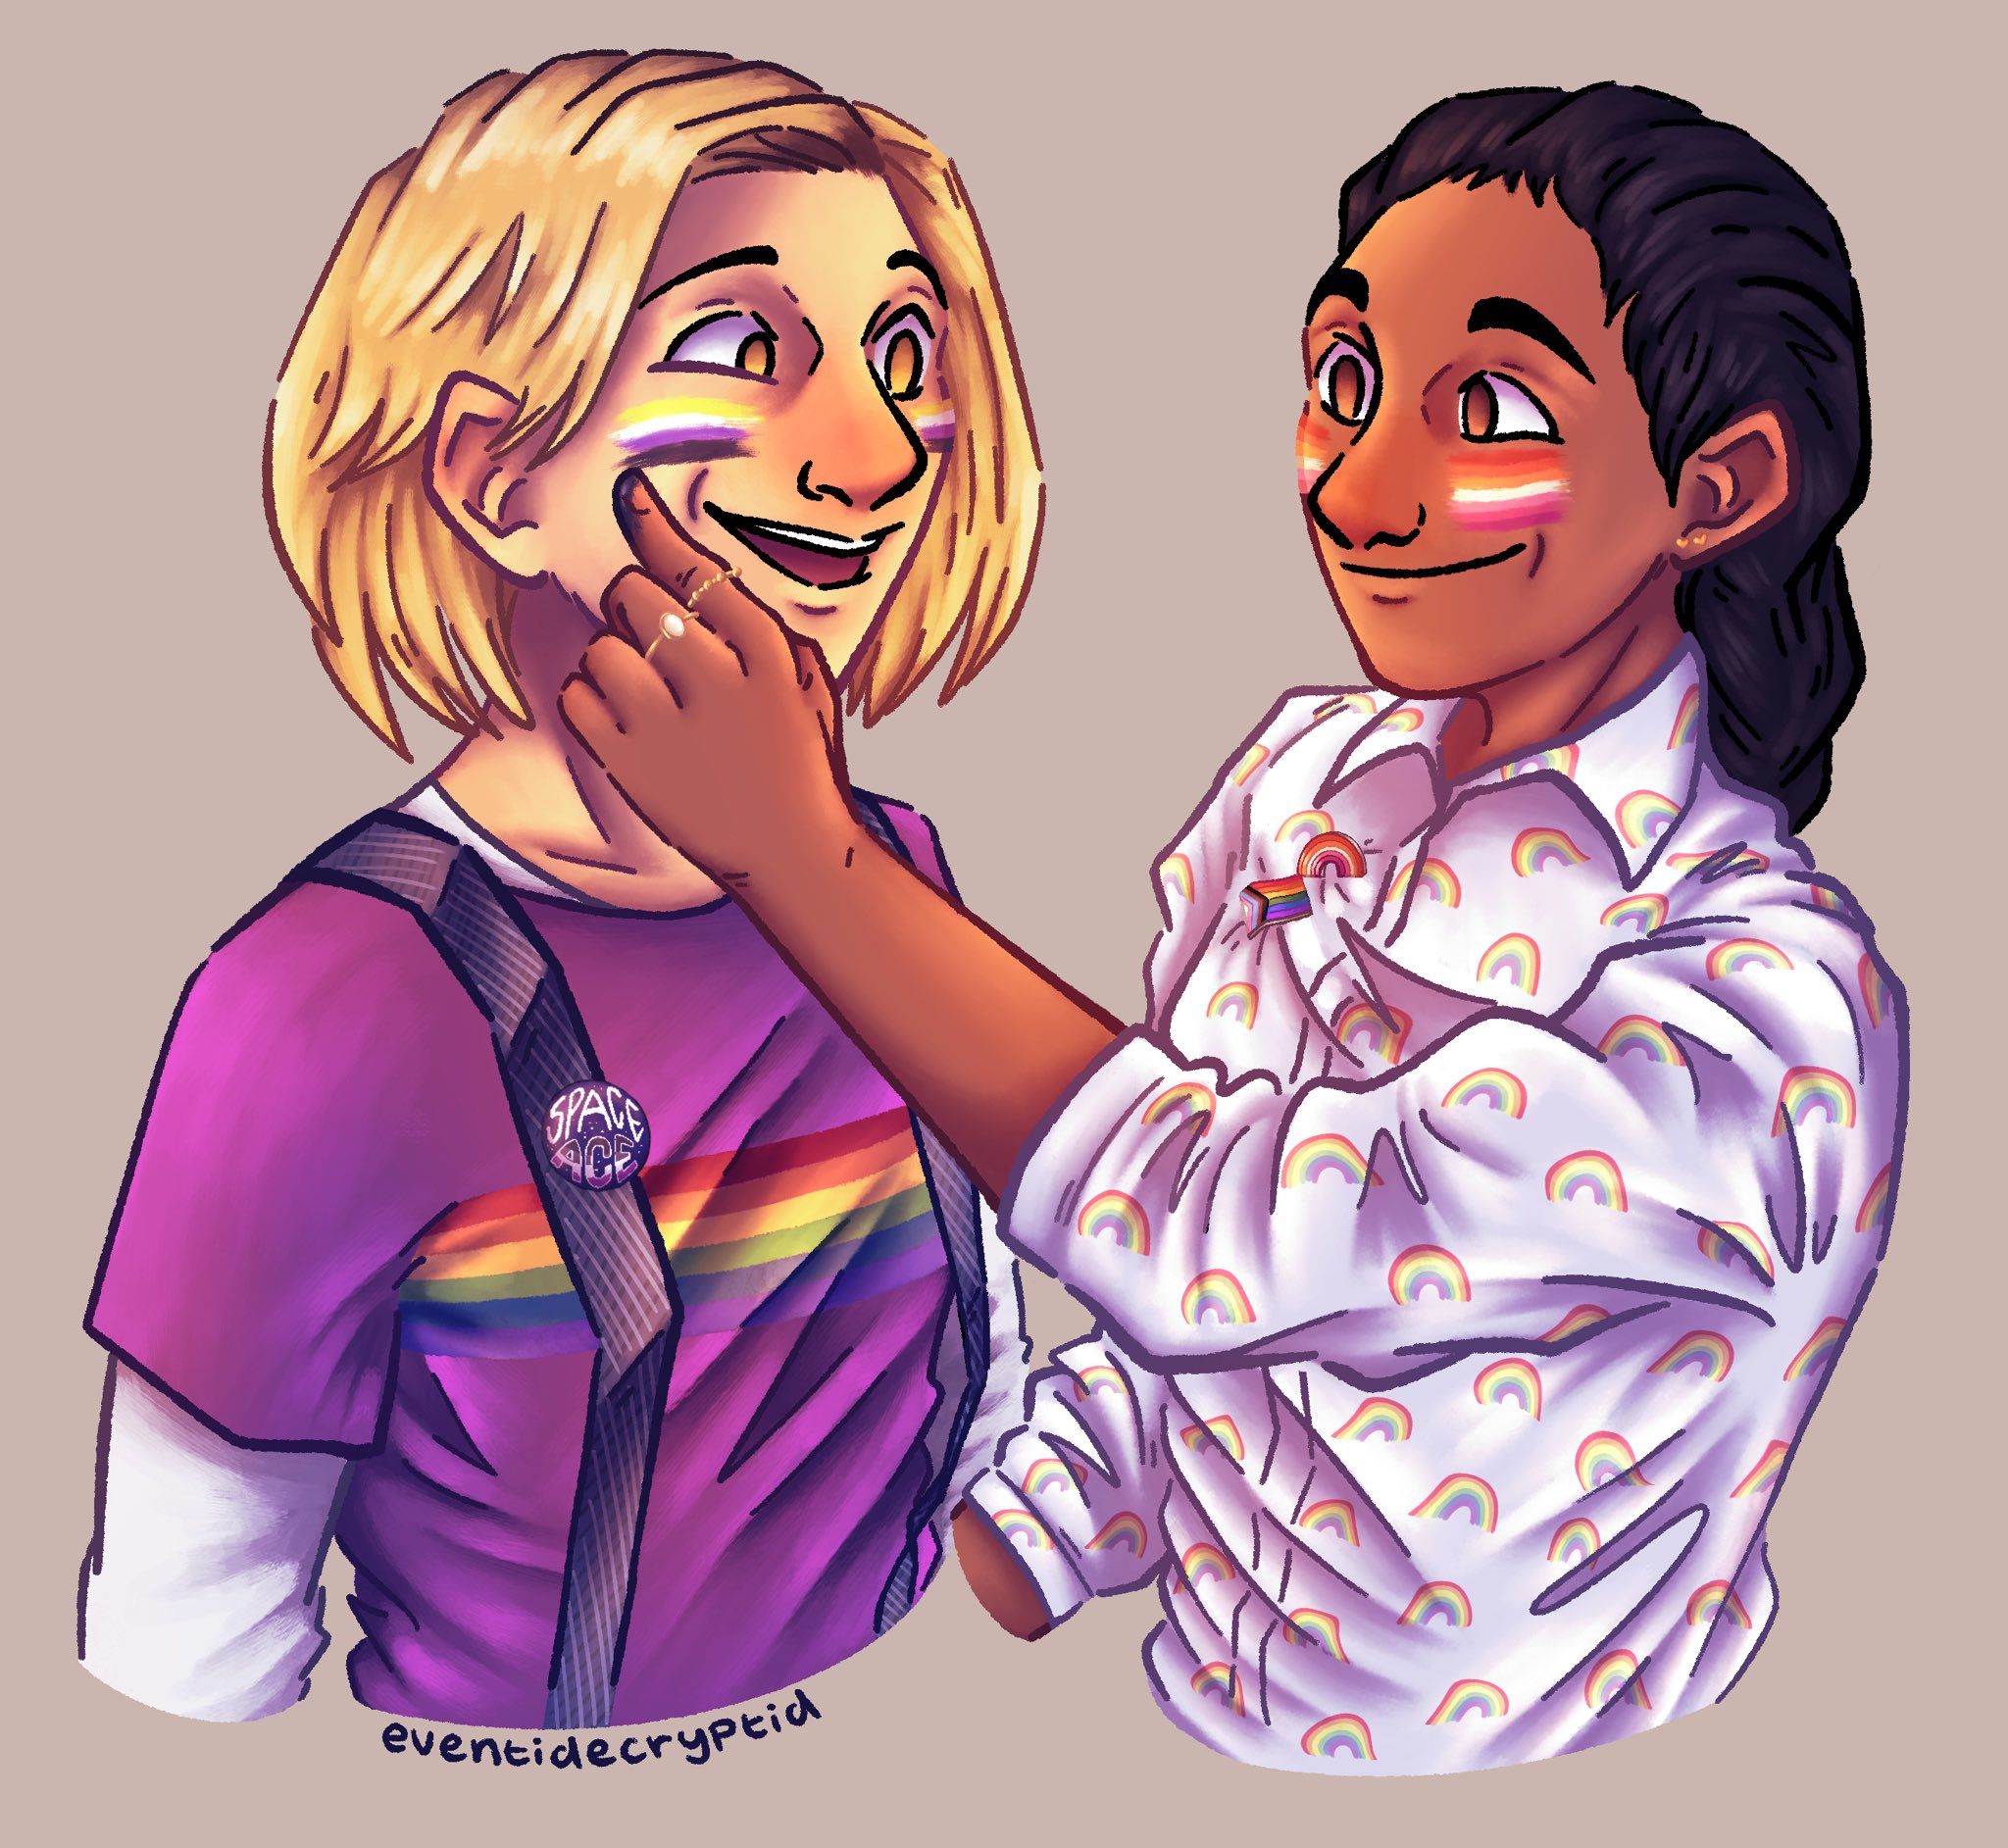 3 June: "Gearing up for Pride month with the Doctor and Yaz! 🏳️‍🌈 #FanartFriday 🖌️: @eventidecryptid"[33]